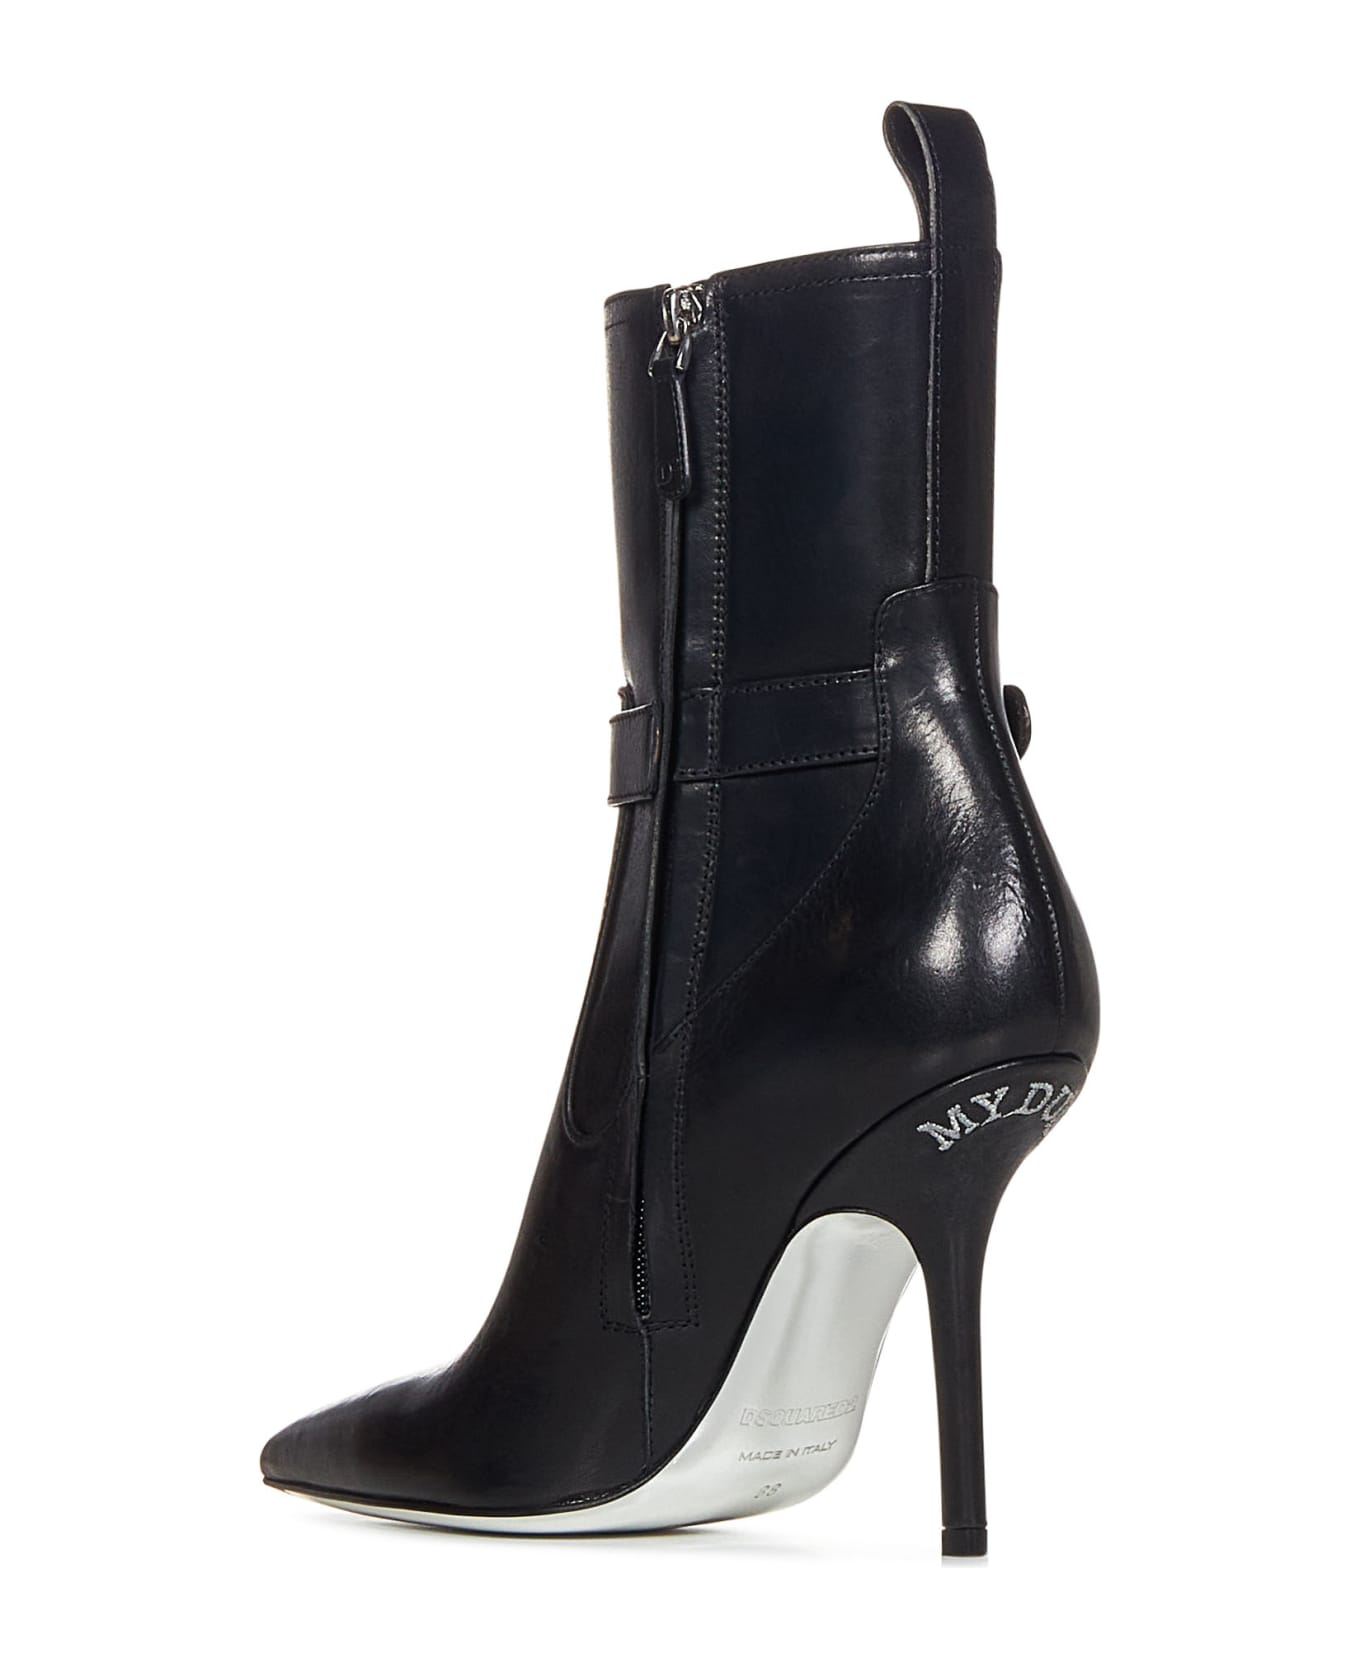 Dsquared2 Rodeo Girl Heeled Ankle Boots - Black ブーツ